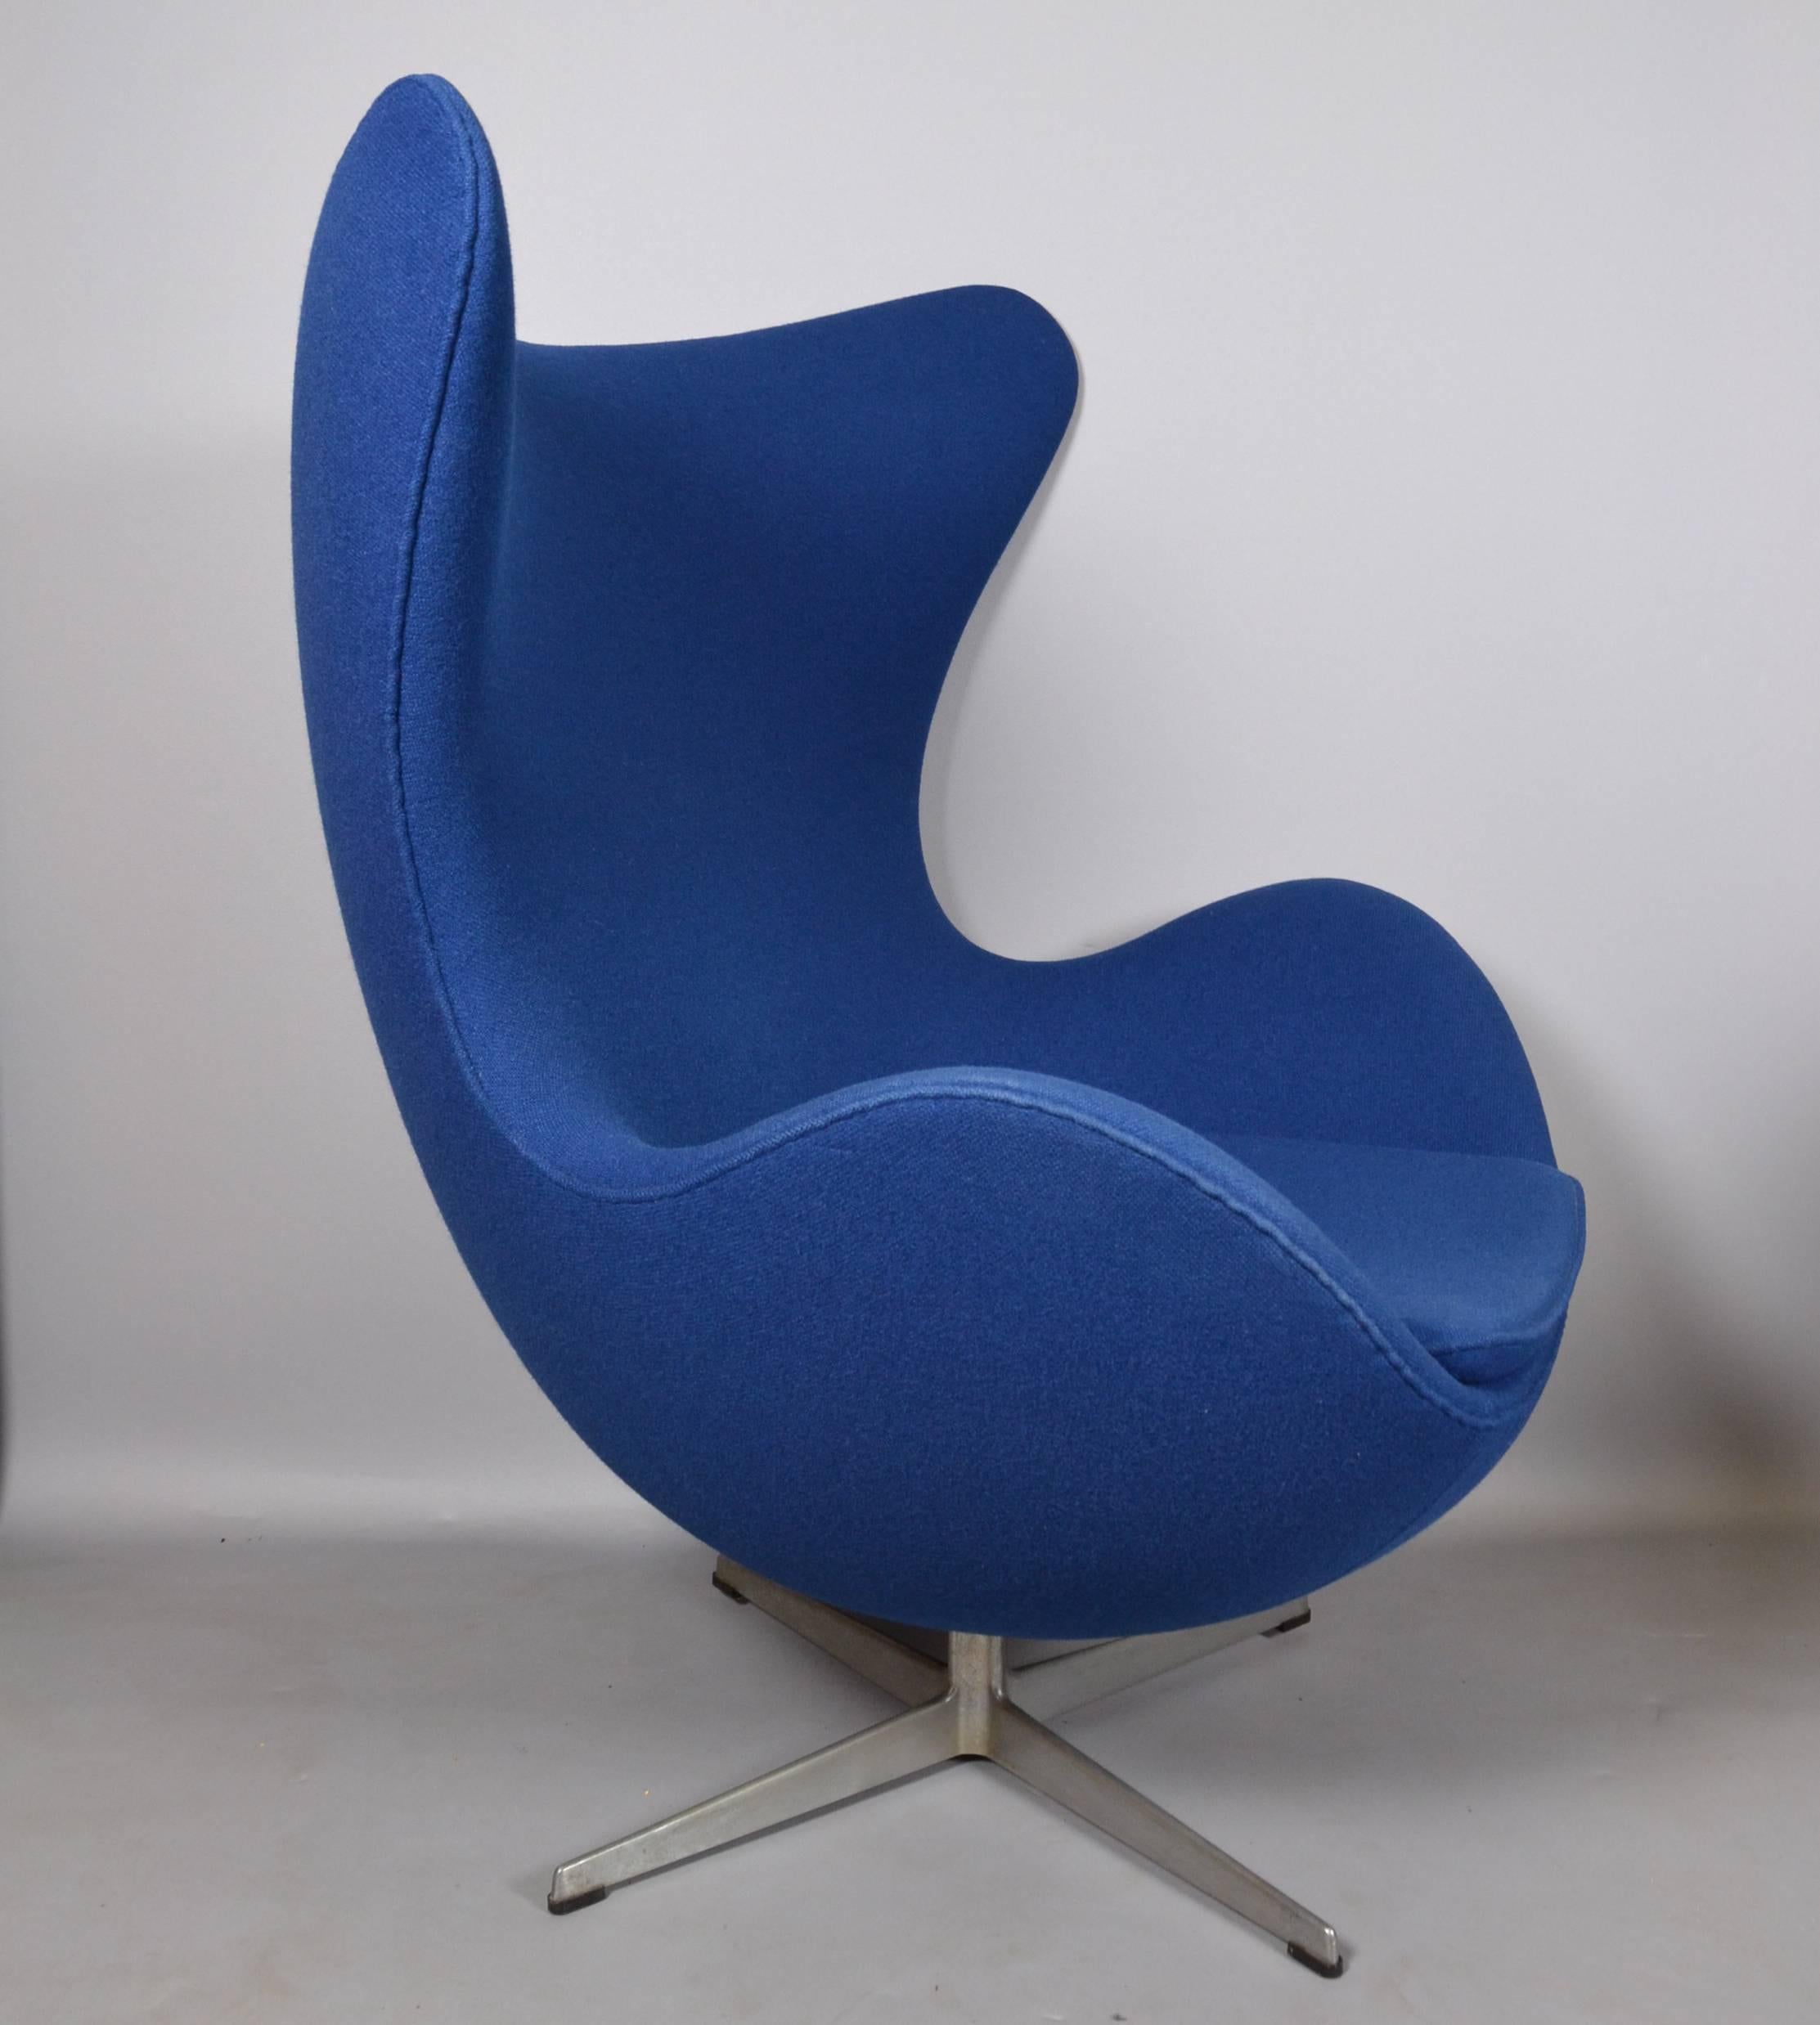 1970s egg chair